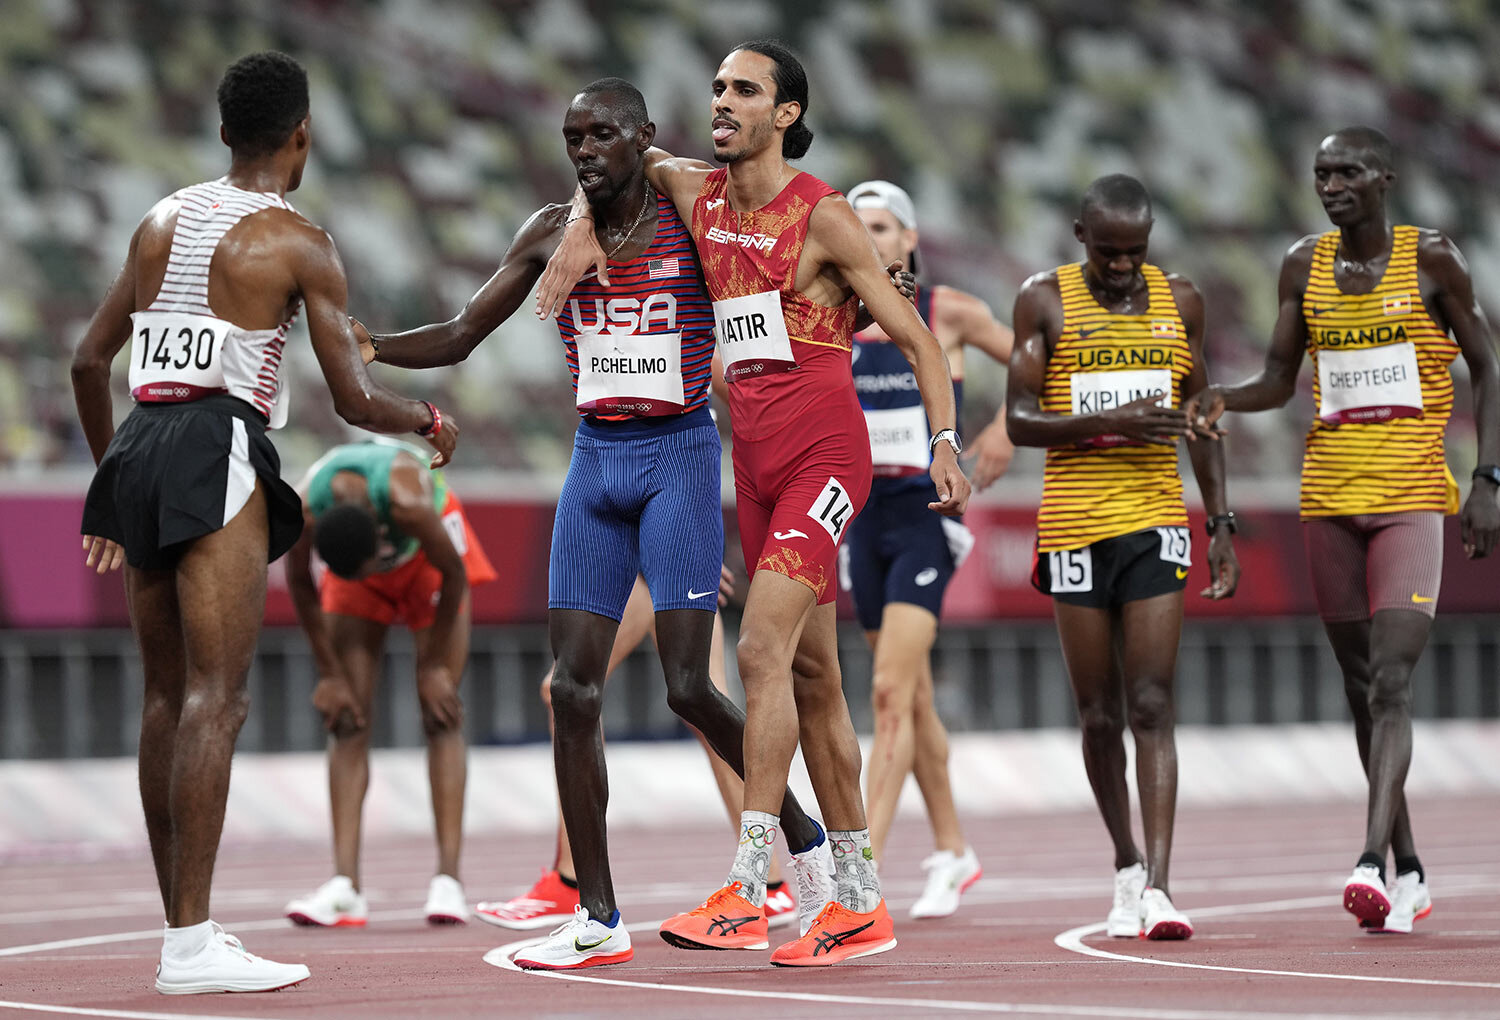  Mohamed Katir, of Spain and Paul Chelimo, of United States embrace as they finish in a men's 5,000-meter heat at the 2020 Summer Olympics, Tuesday, Aug. 3, 2021, in Tokyo, Japan. (AP Photo/Martin Meissner) 